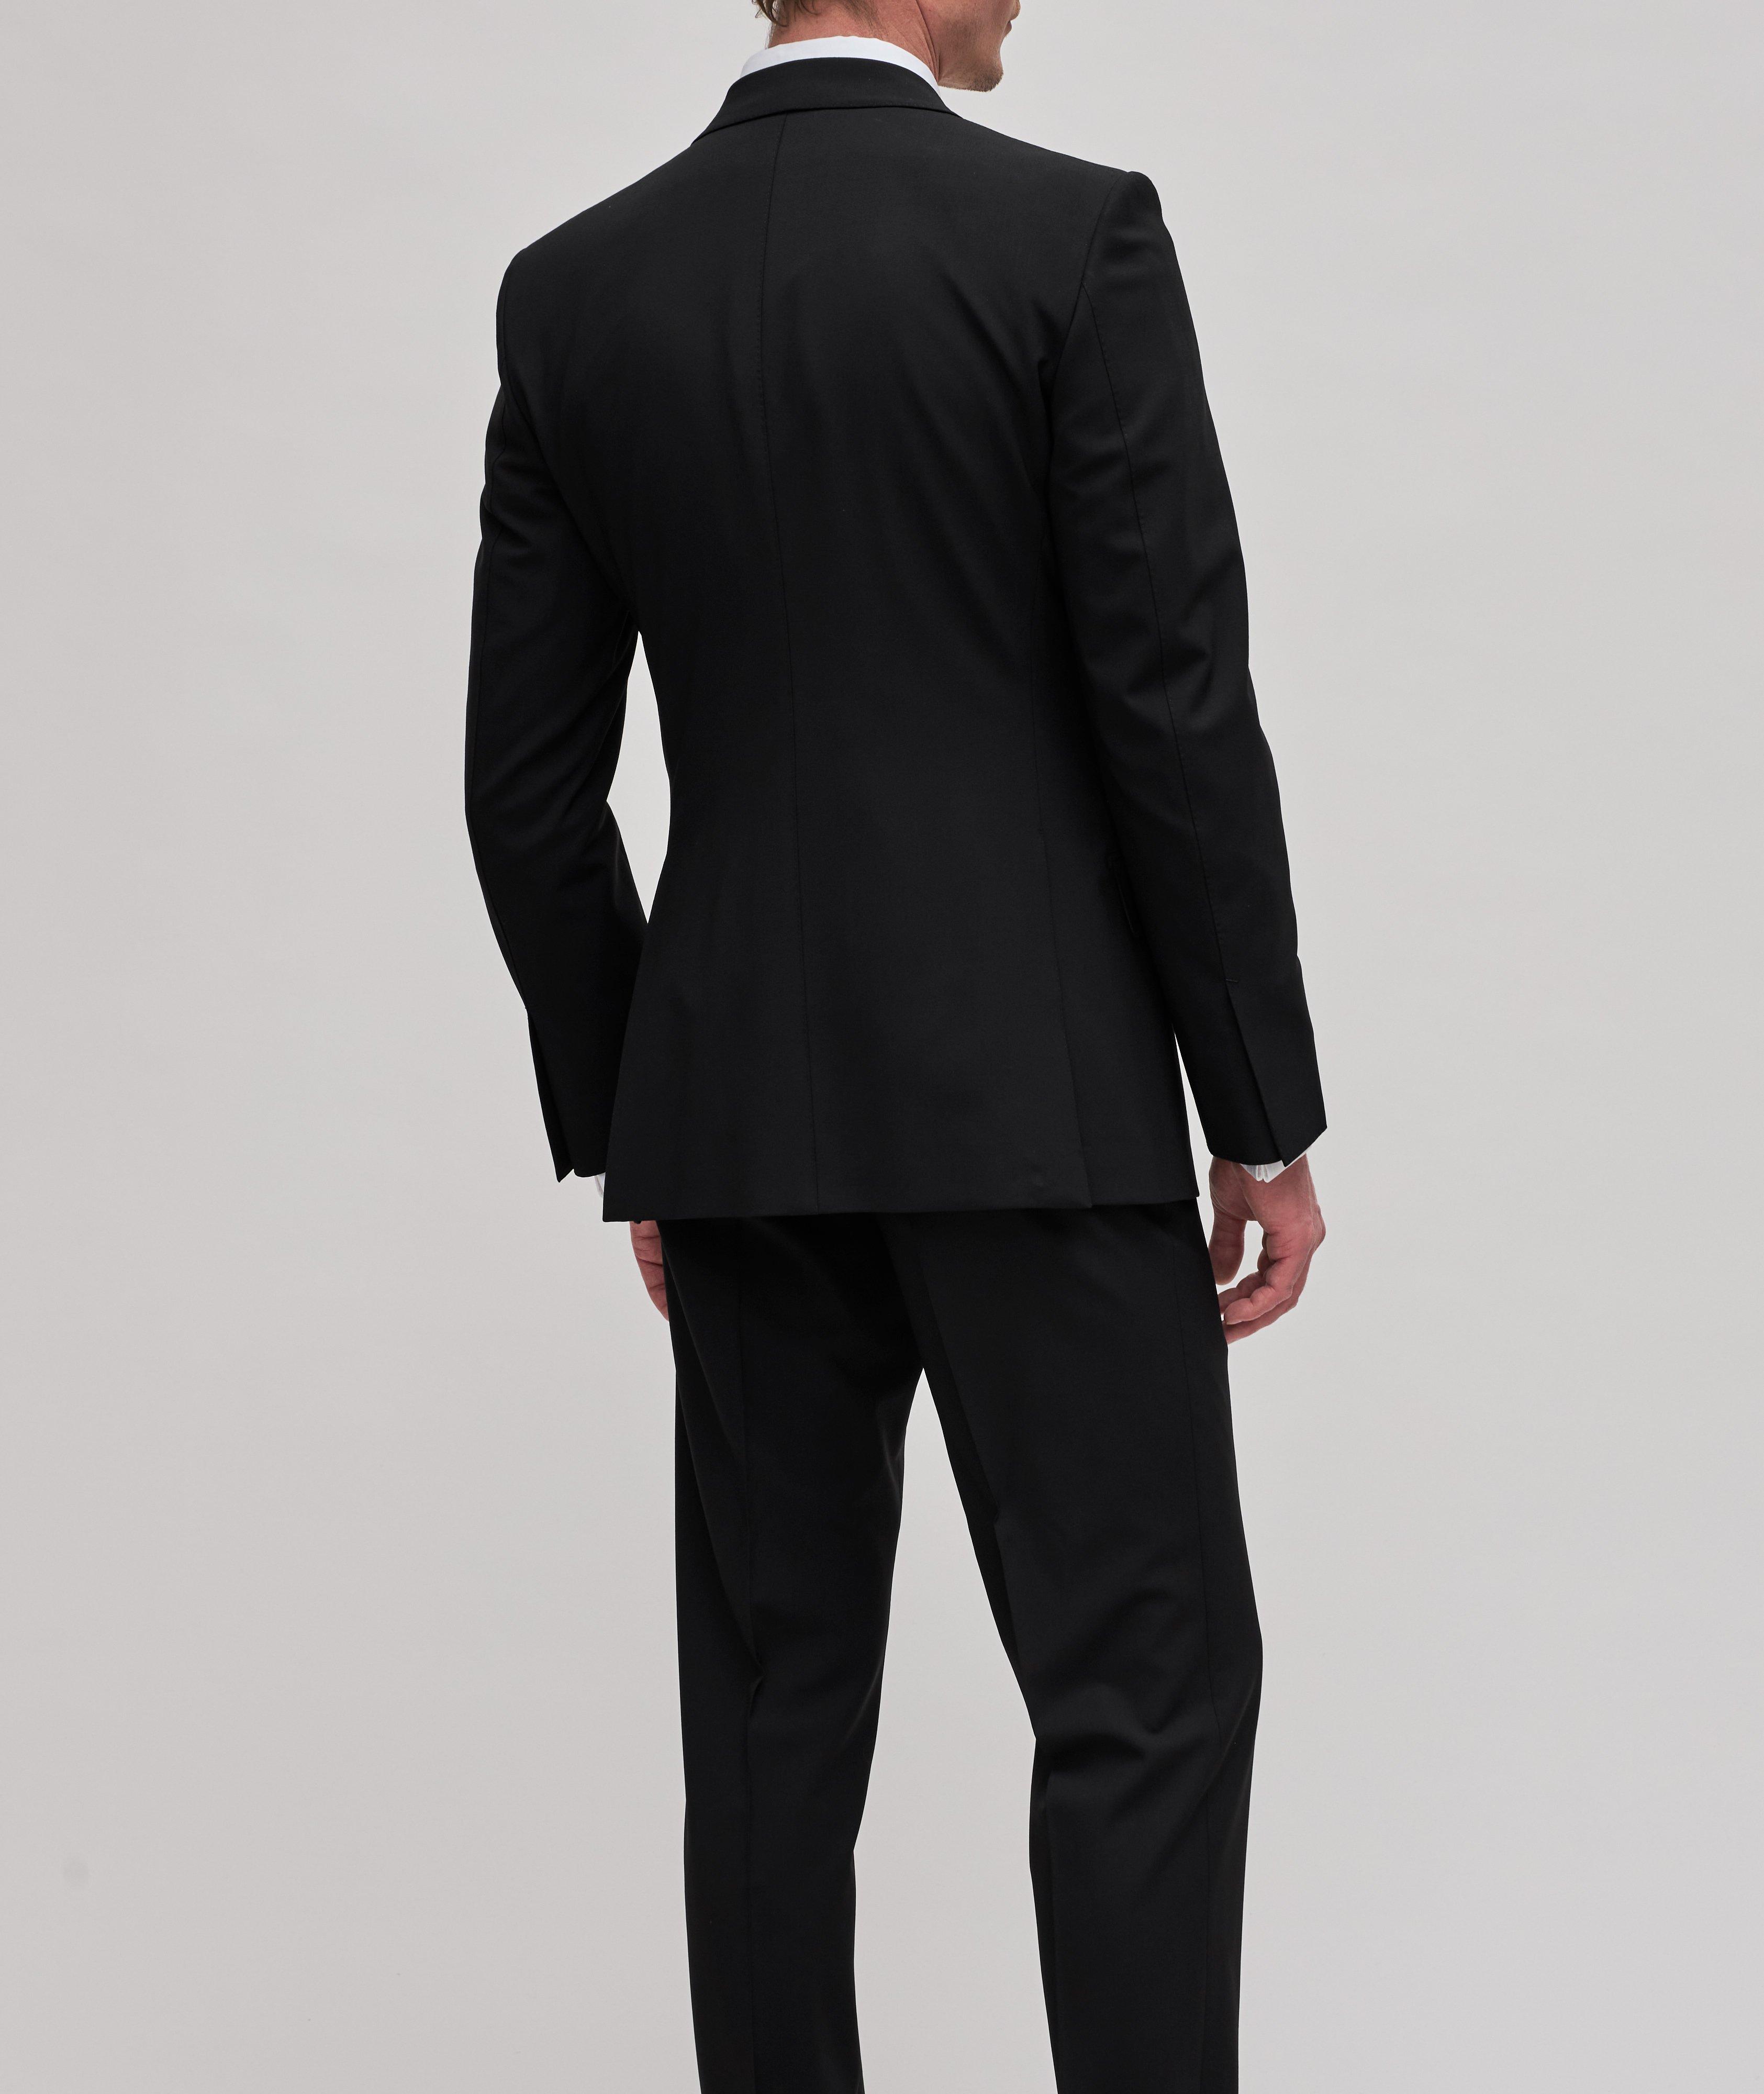 O'Connor Plain Weave Stretch-Wool Suit image 2